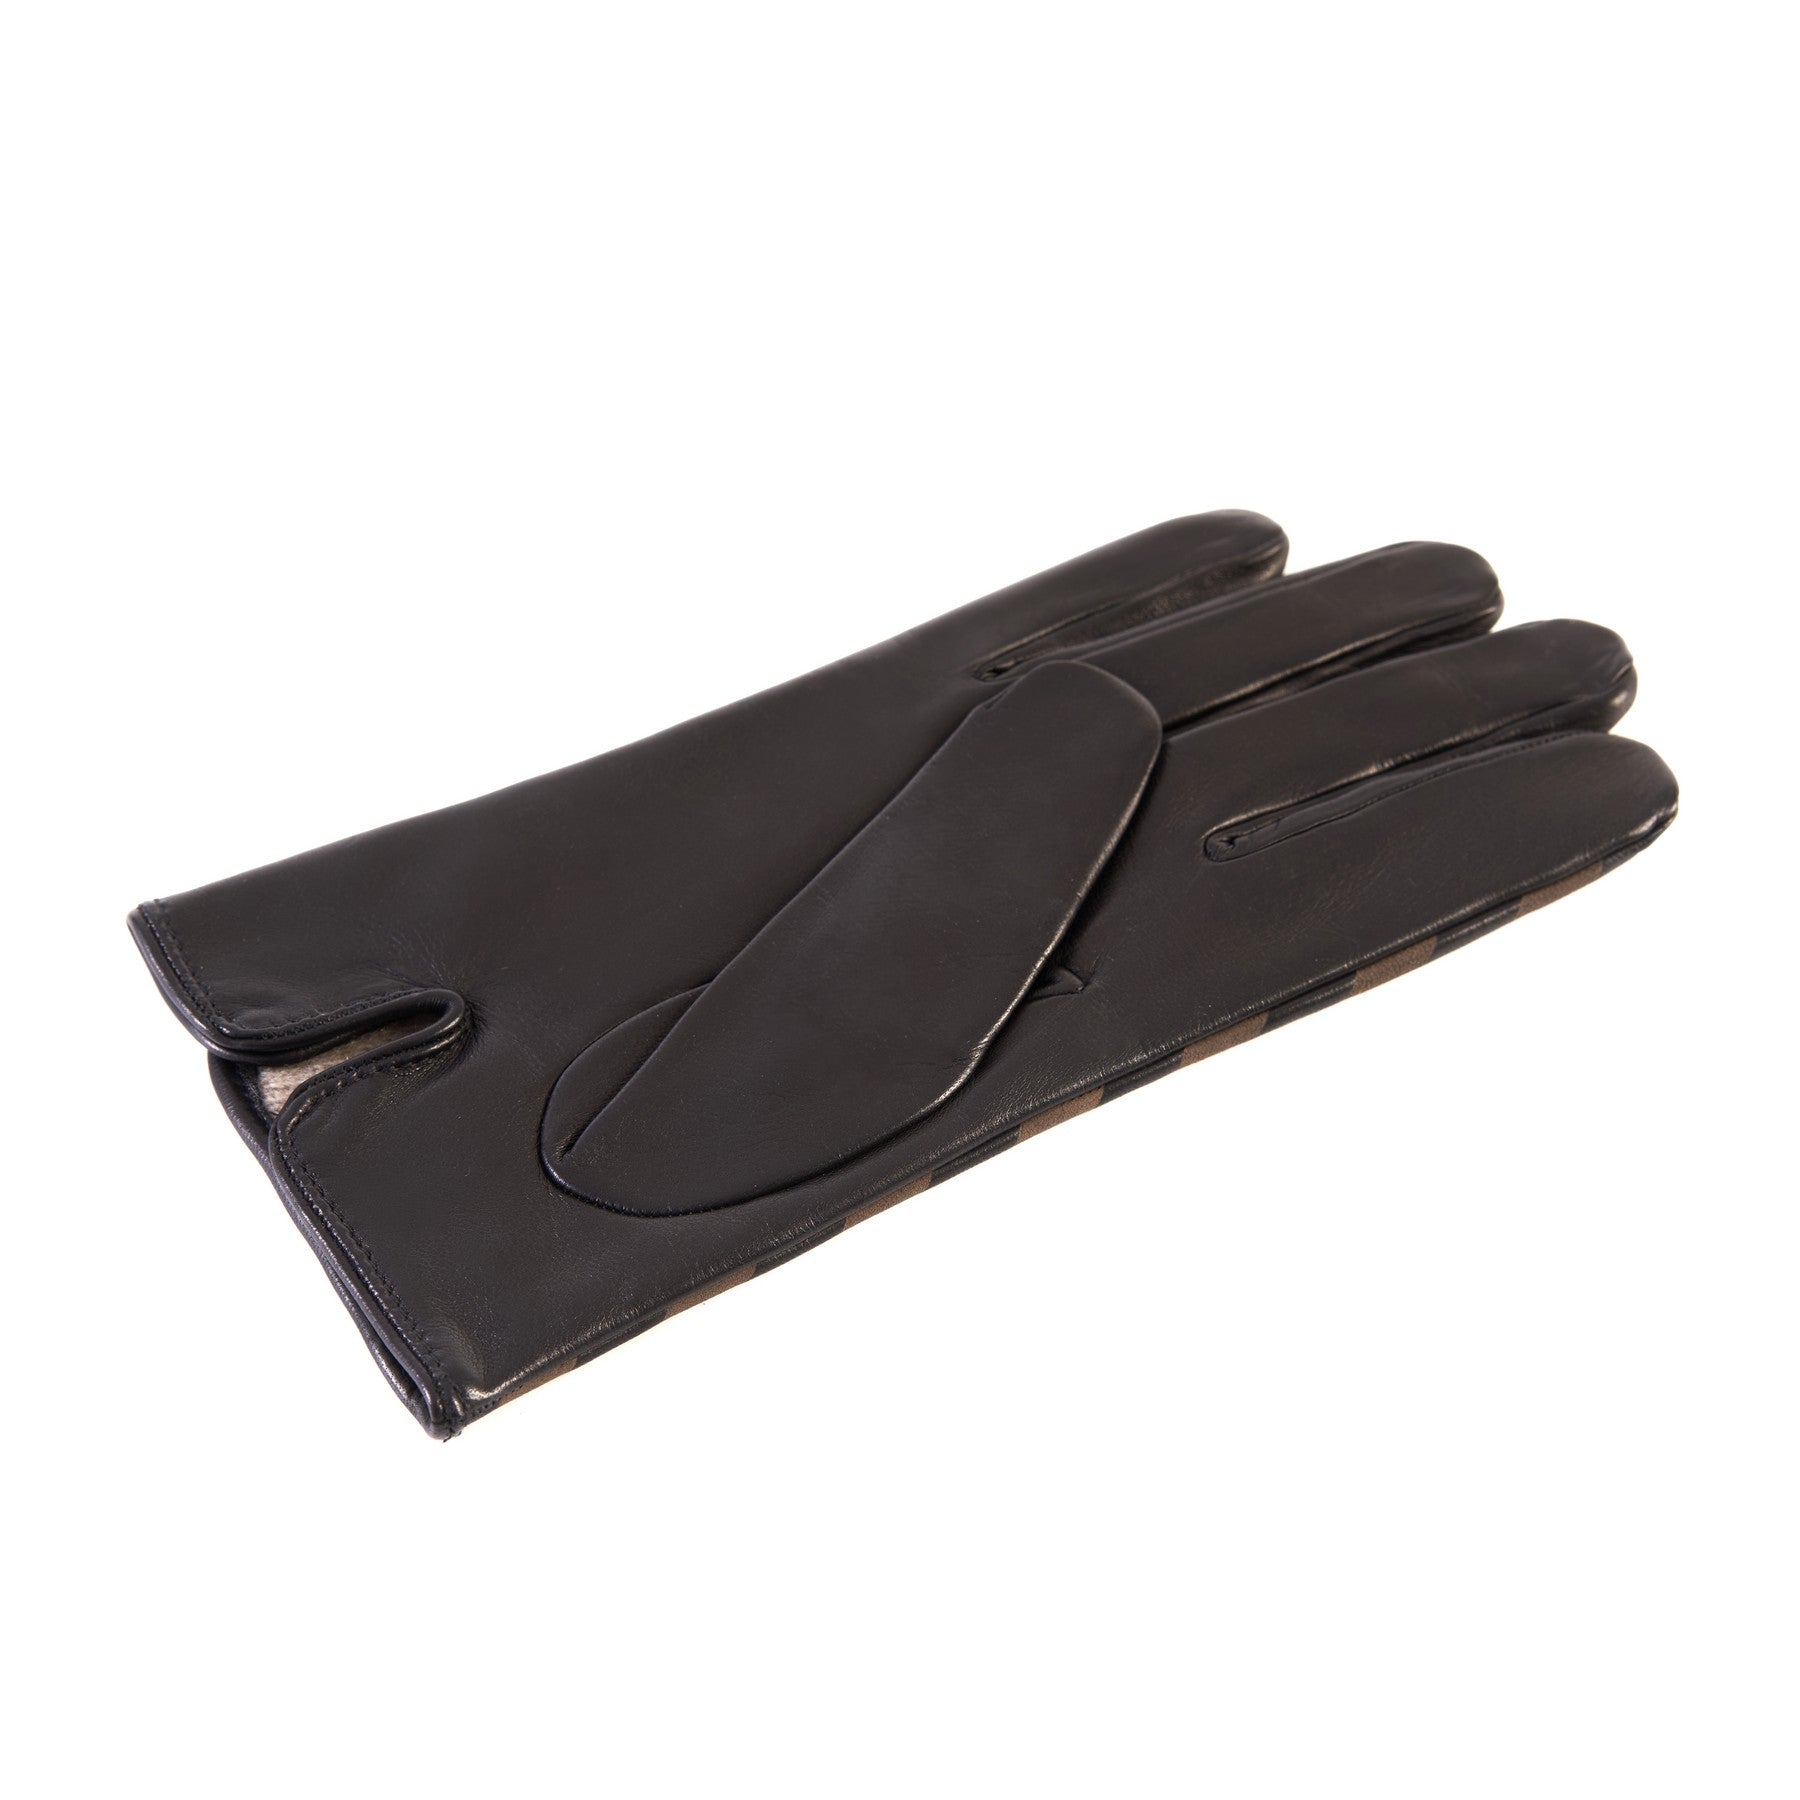 Men's black nappa leather gloves with laser-worked on the back palm opening and cashmere lining